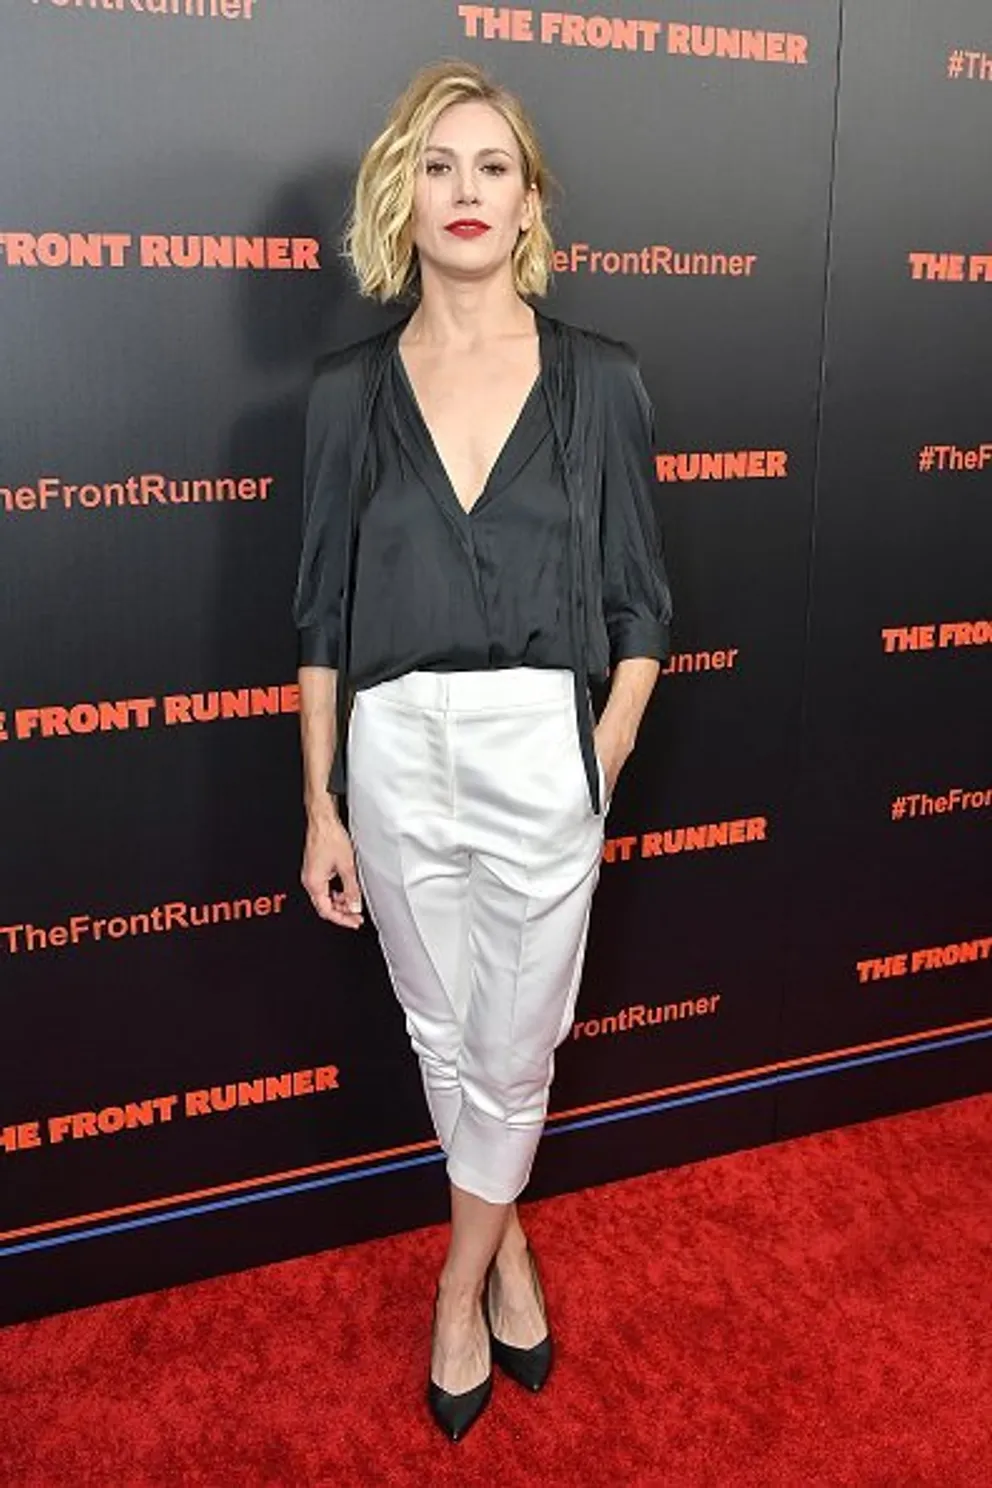 Jennifer Landon attends the New York premiere of 'The Front Runner' at the Museum of Modern Art on October 30, 2018, in New York City. | Source: Getty Images.